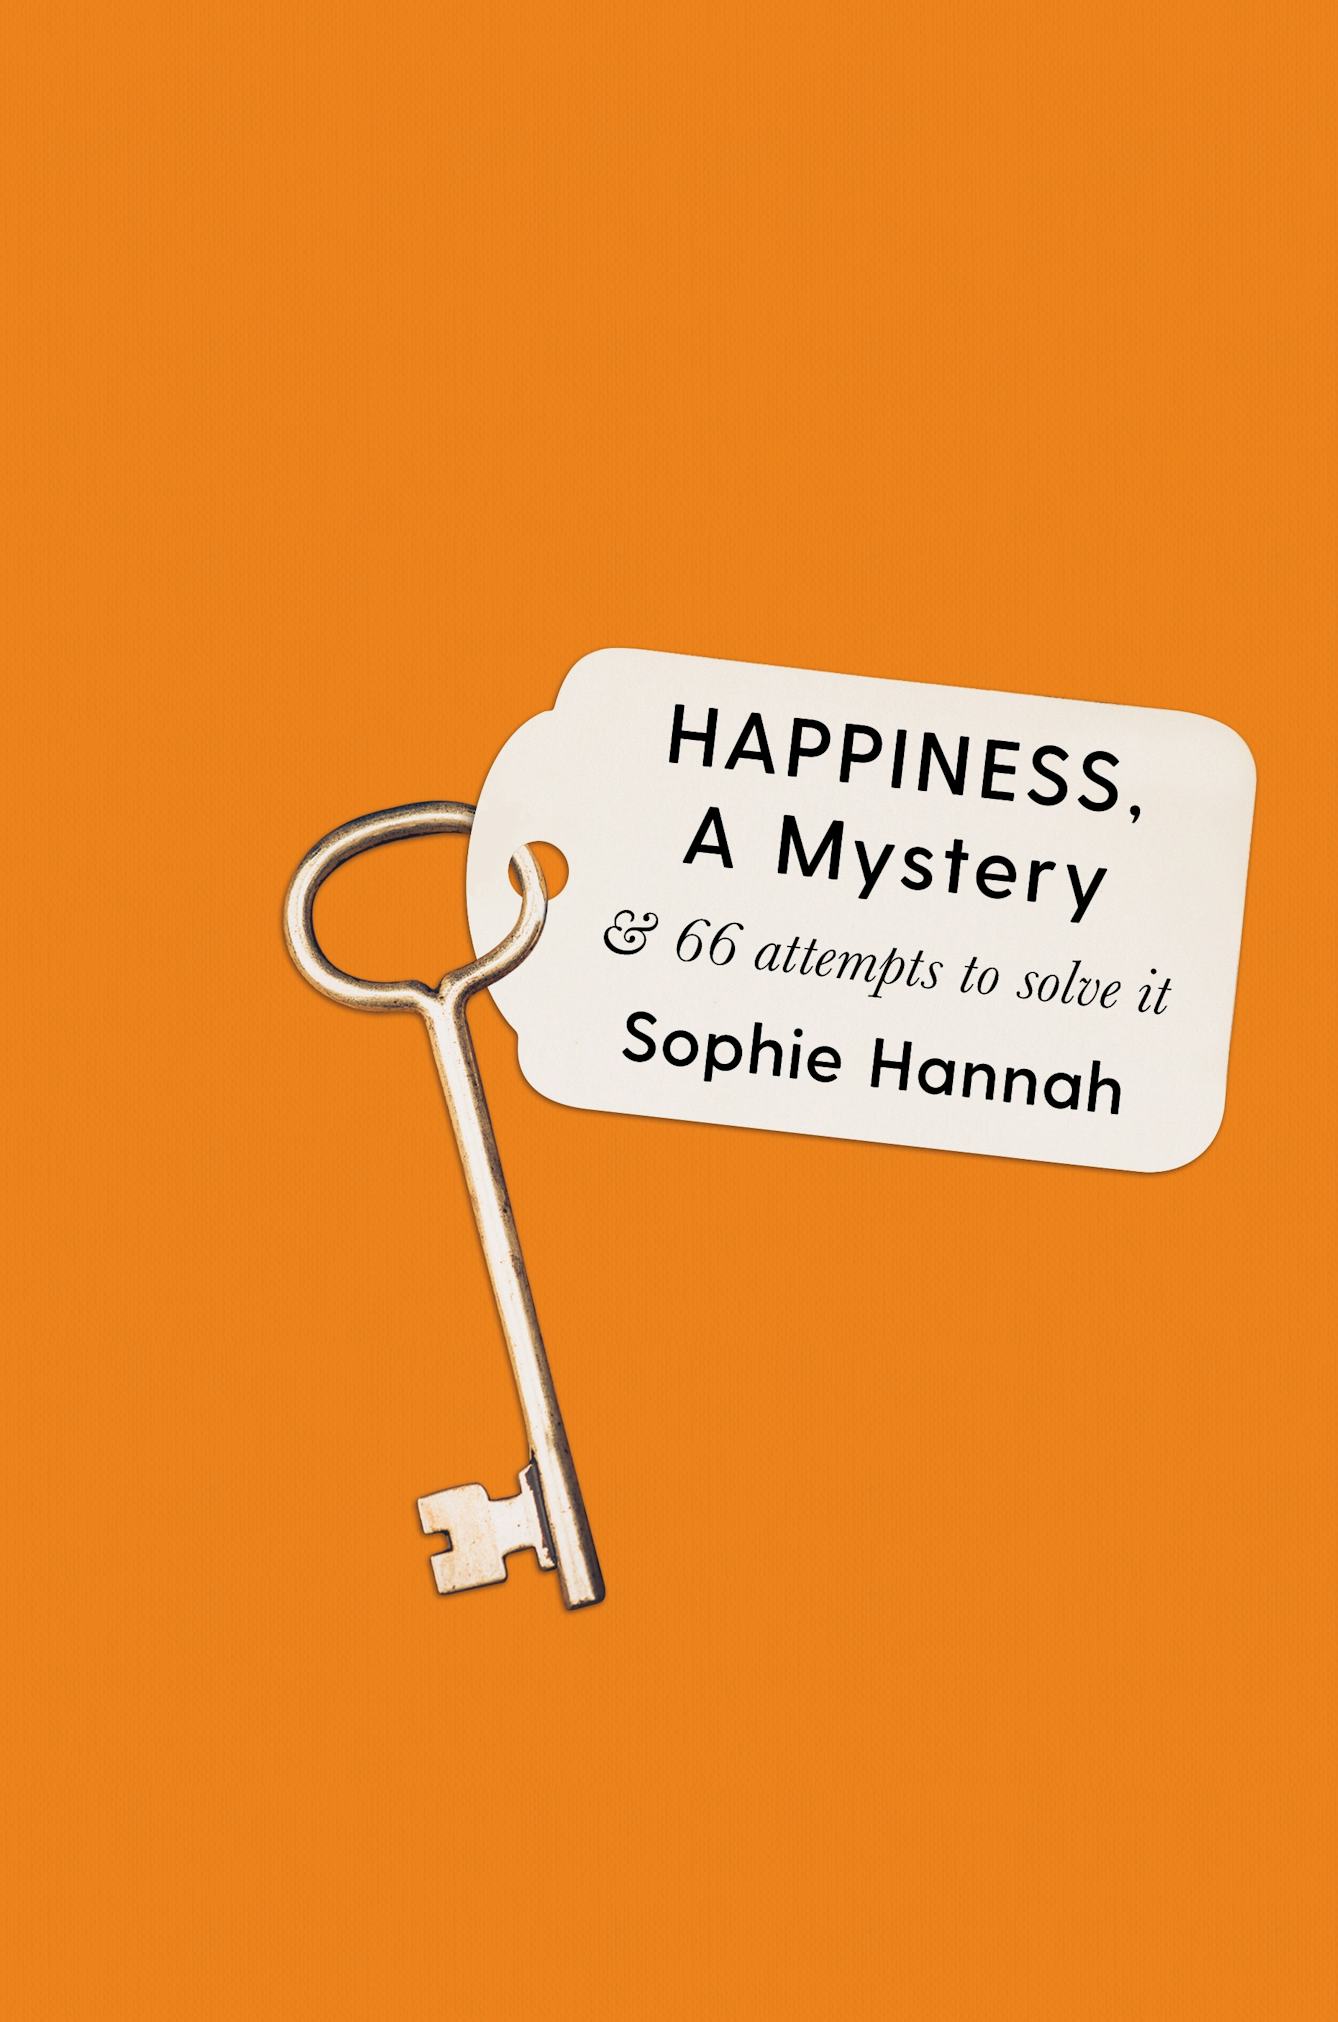 Happiness, a Mystery book cover